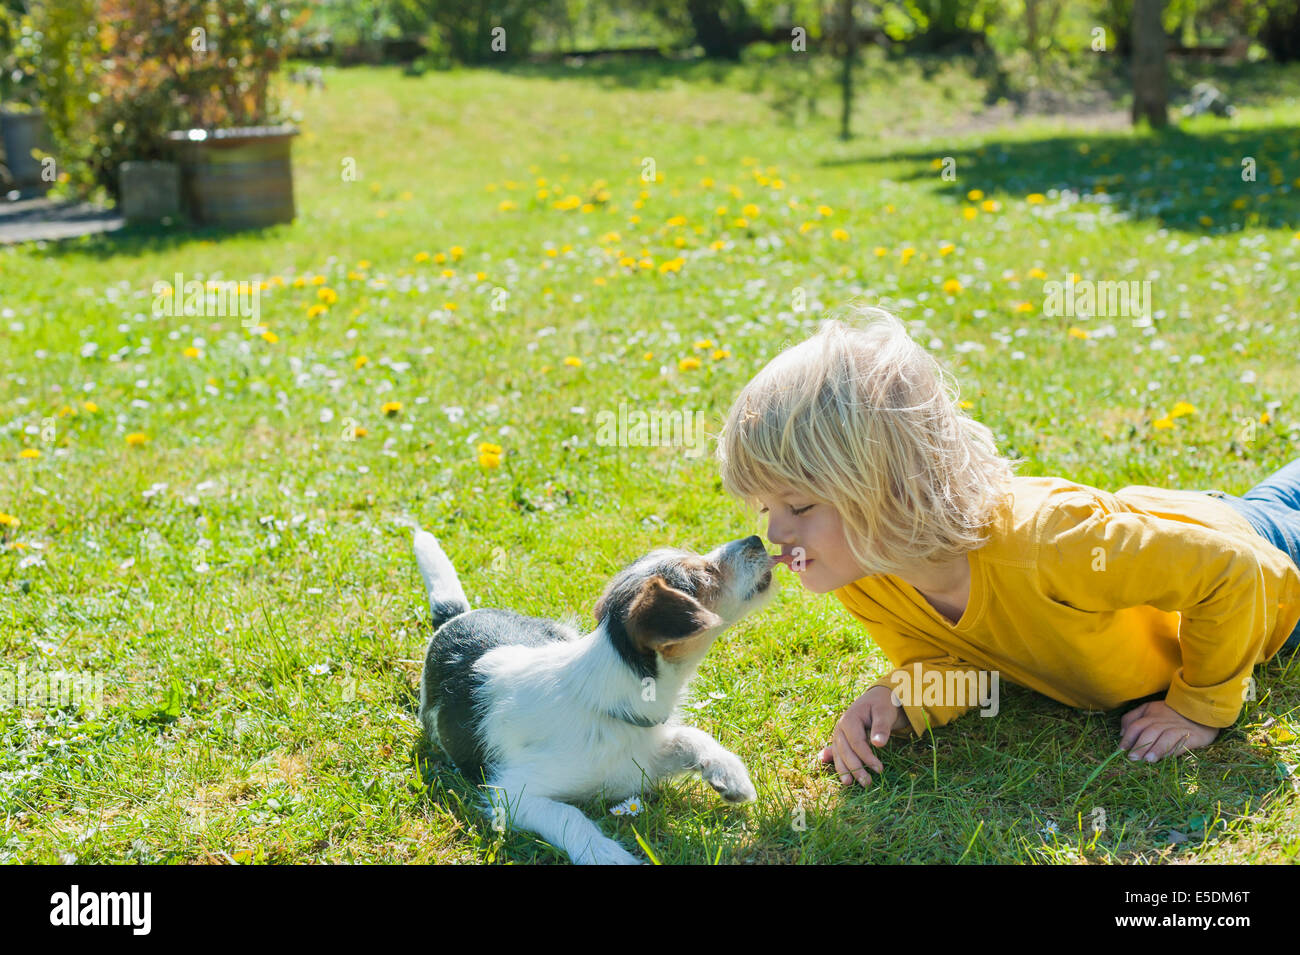 Boy playing with Jack Russel Terrier puppy in garden Stock Photo